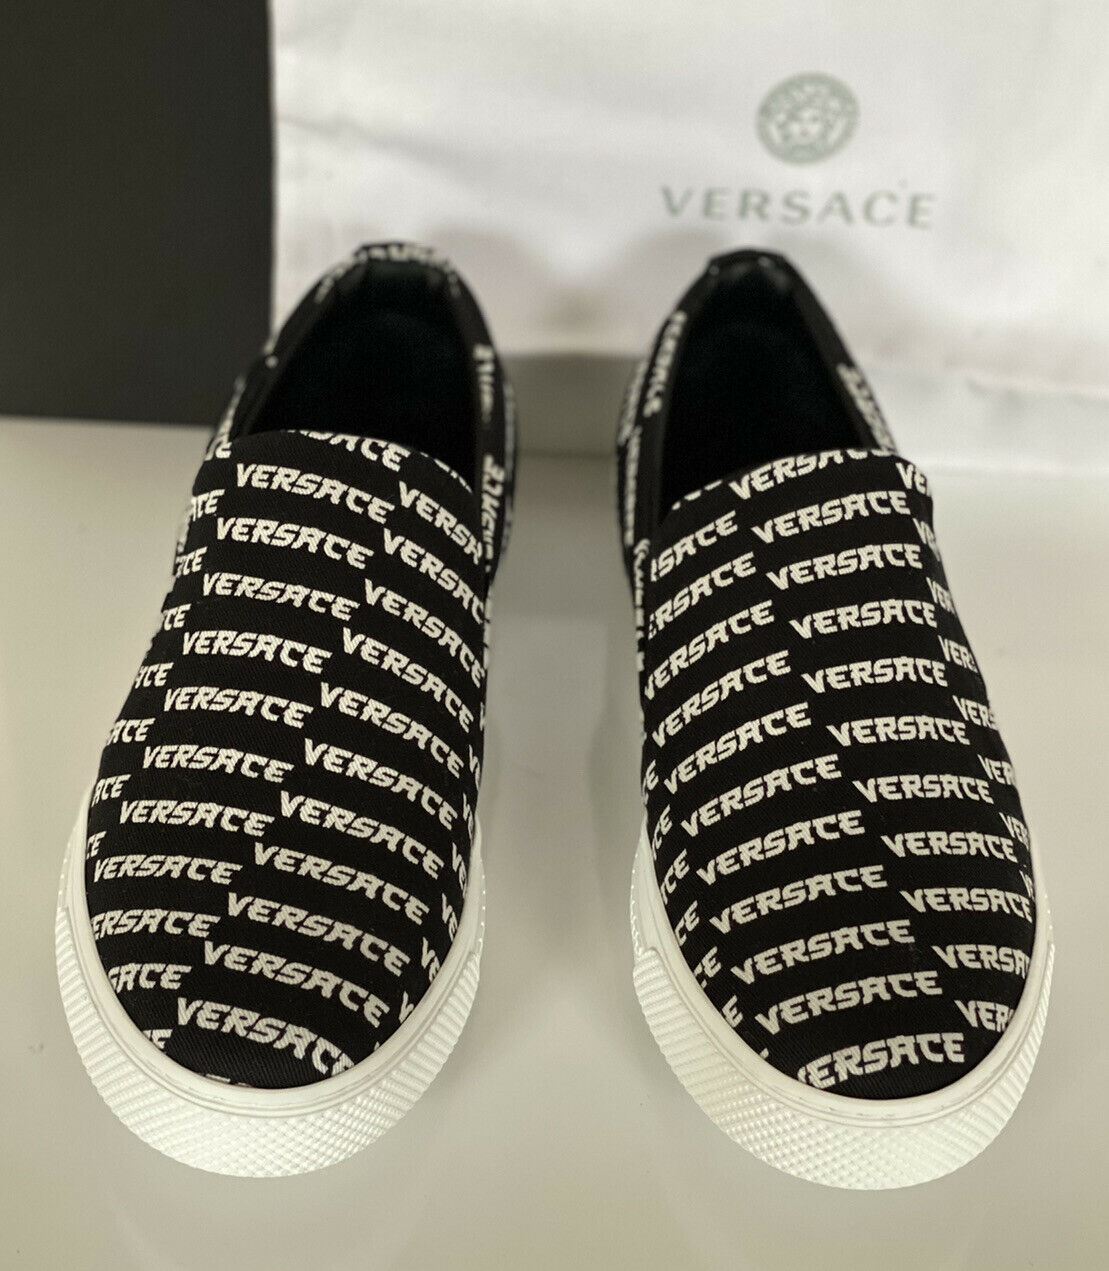 NIB VERSACE Mens Black and White Nylon Sneakers 11 US (44 Eu) Made in Italy